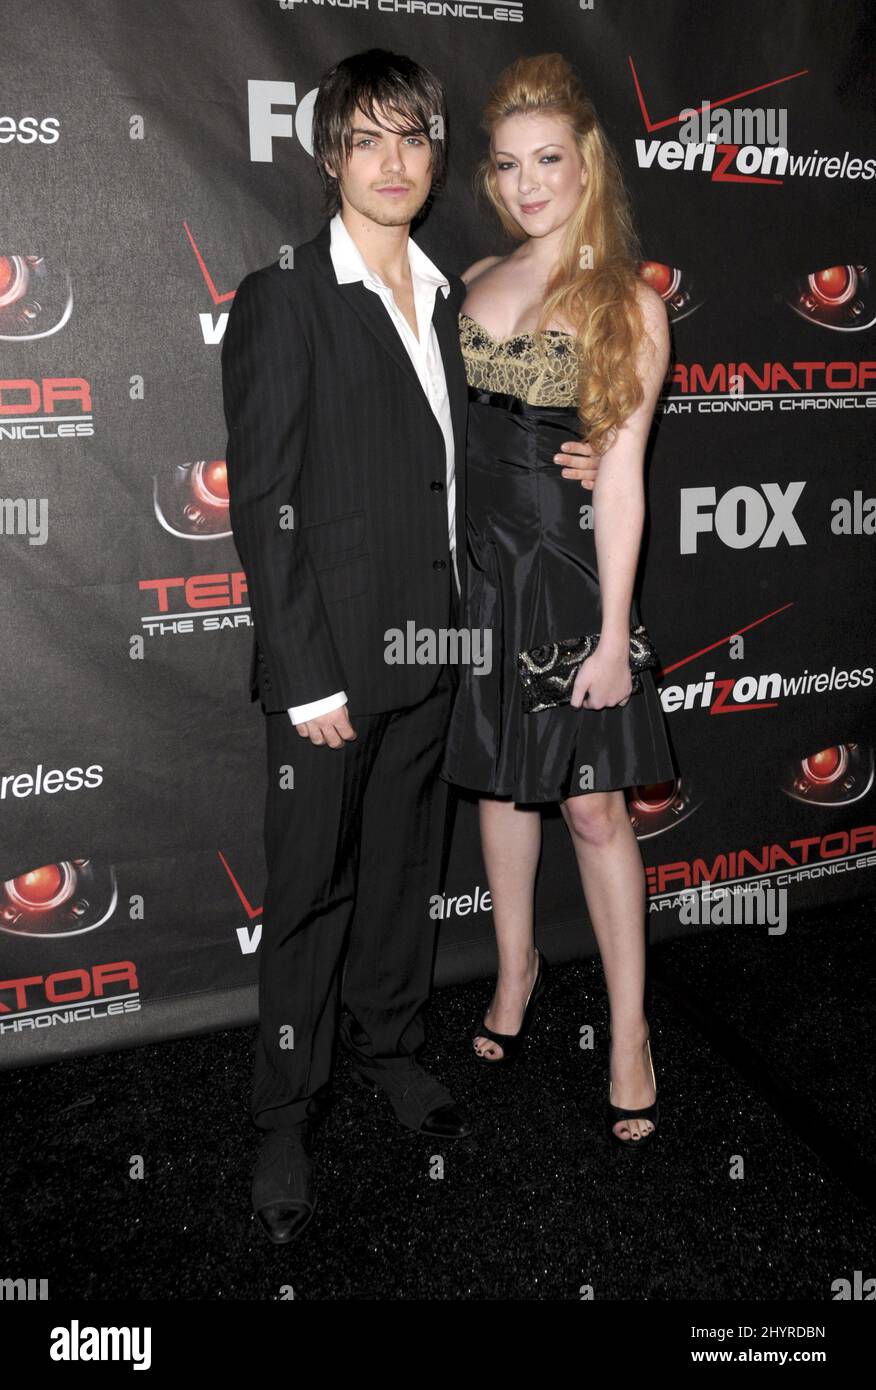 Thomas Dekker and Sydney Freggiaro attend Terminator: The Sarah Connor Chronicles Premiere, held at the Cinerama Dome, Hollywood, California Stock Photo